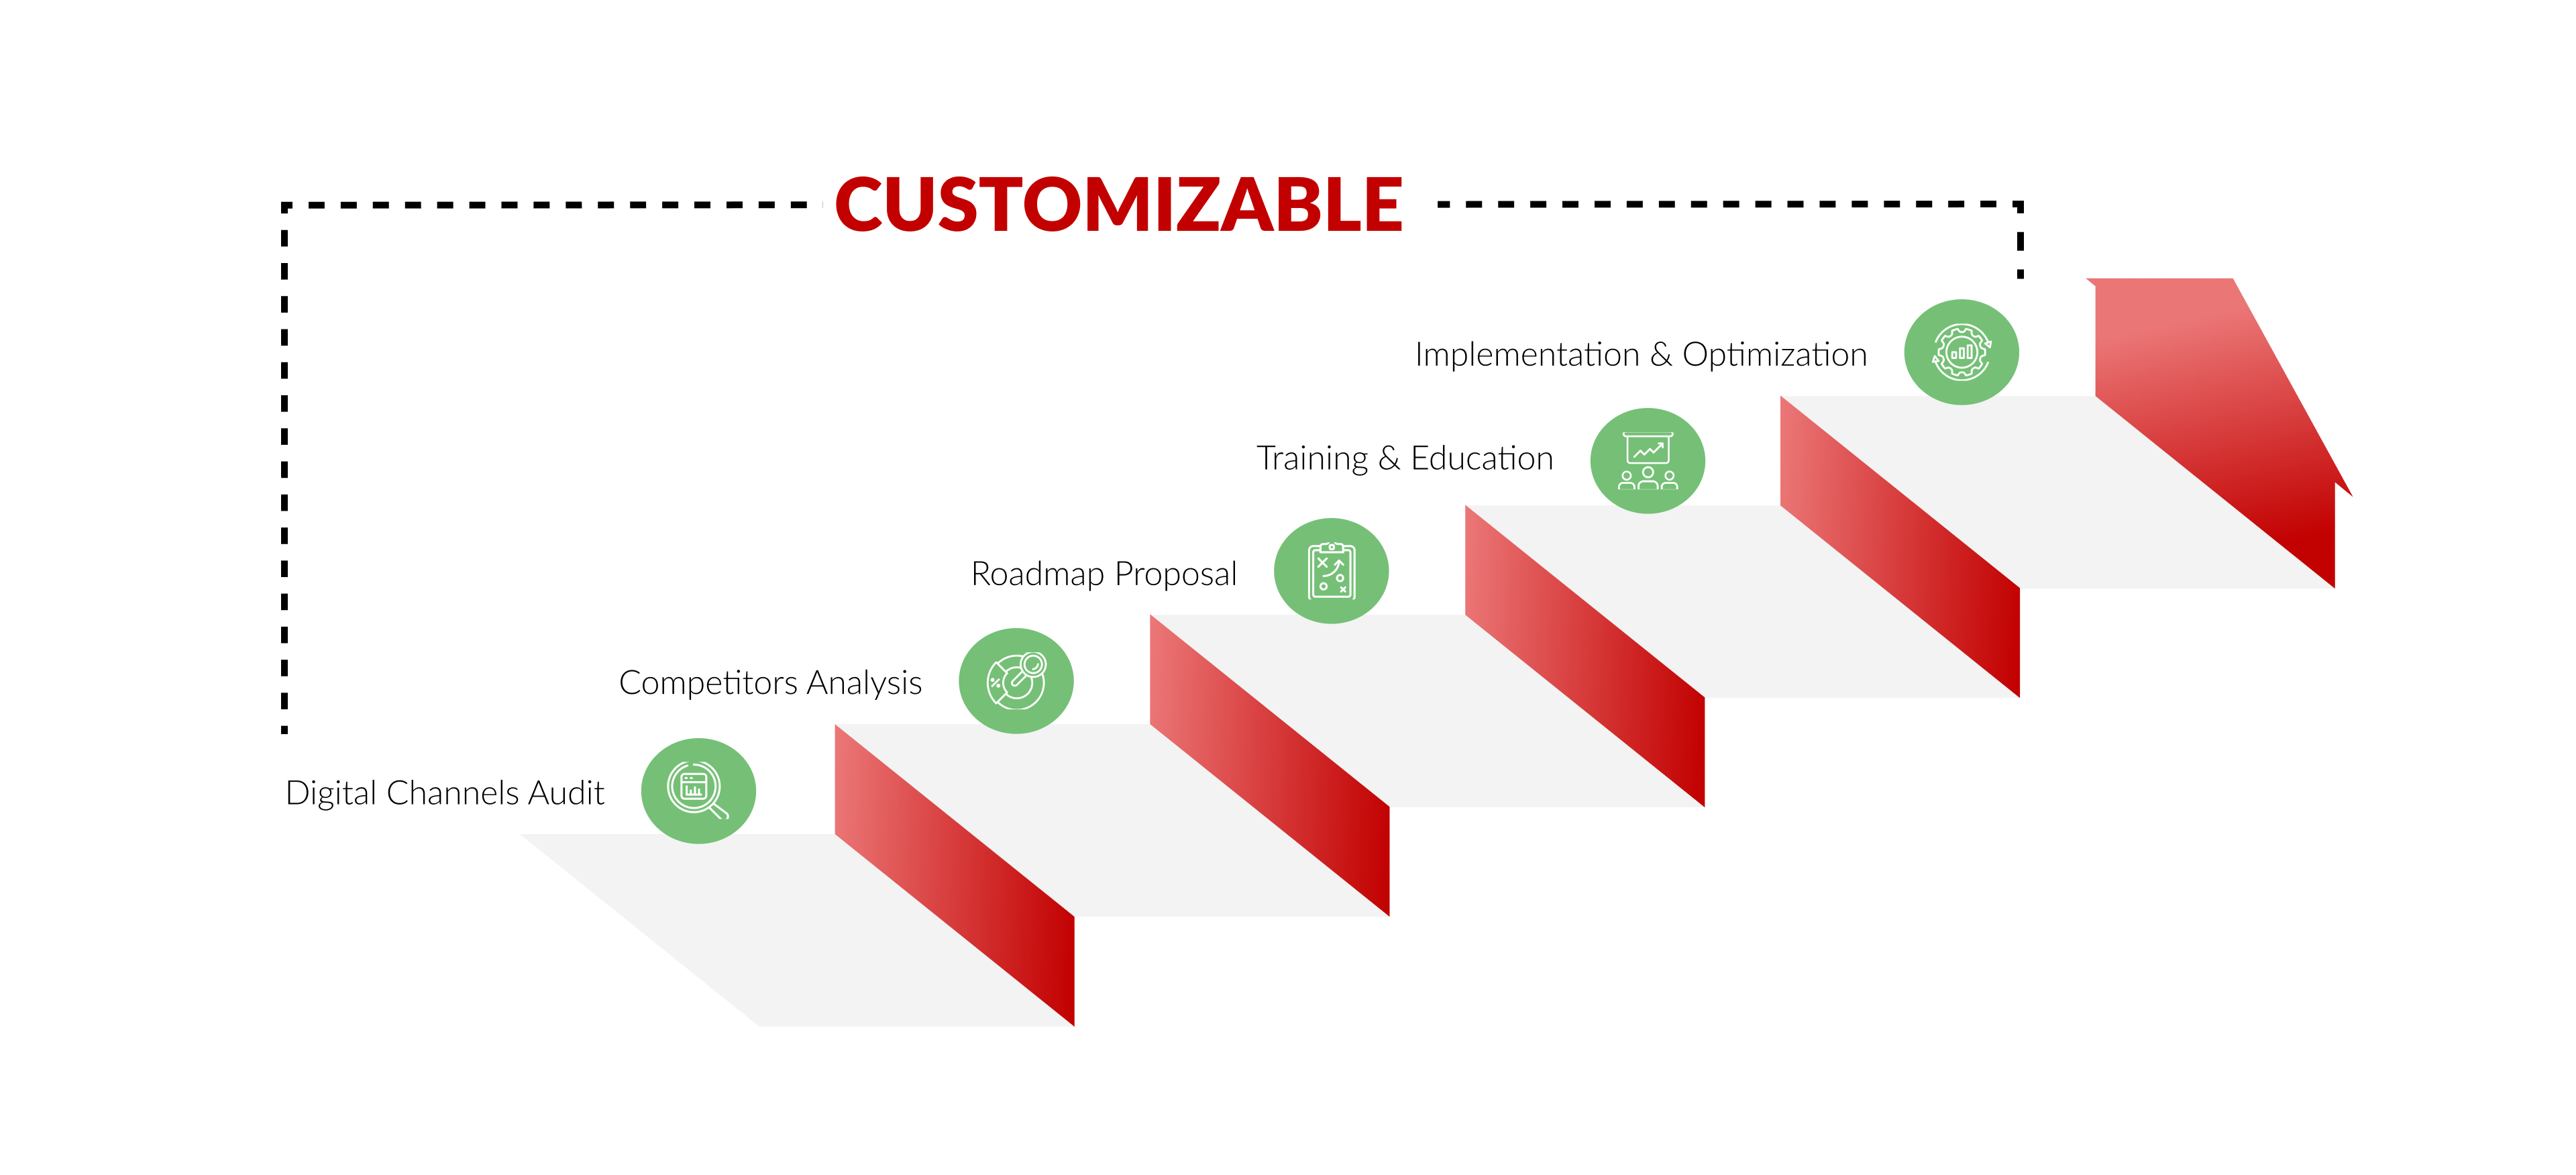 ITC's customizable approach to your digital transformation journey in China